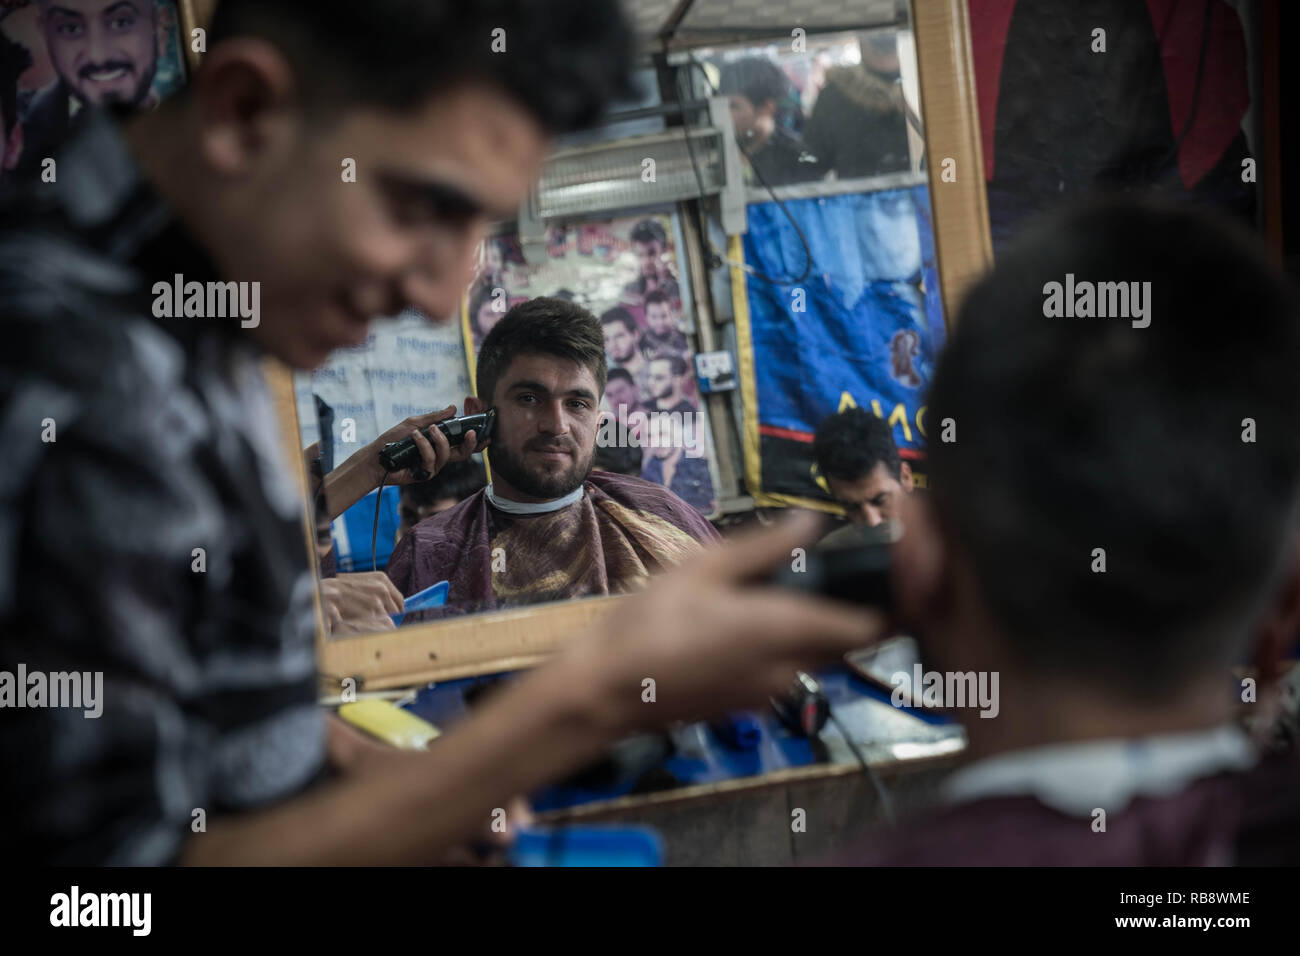 A Yazidi barber cutting hair for another Yazidi man at the market of the Bajed Kandala Camp. The Bajed Kandala IDP camp is hosting over 9000 Yazidi Internally Displaced Persons from Sinjar where they lost their homes to the ISIS militants in August 2014. Stock Photo